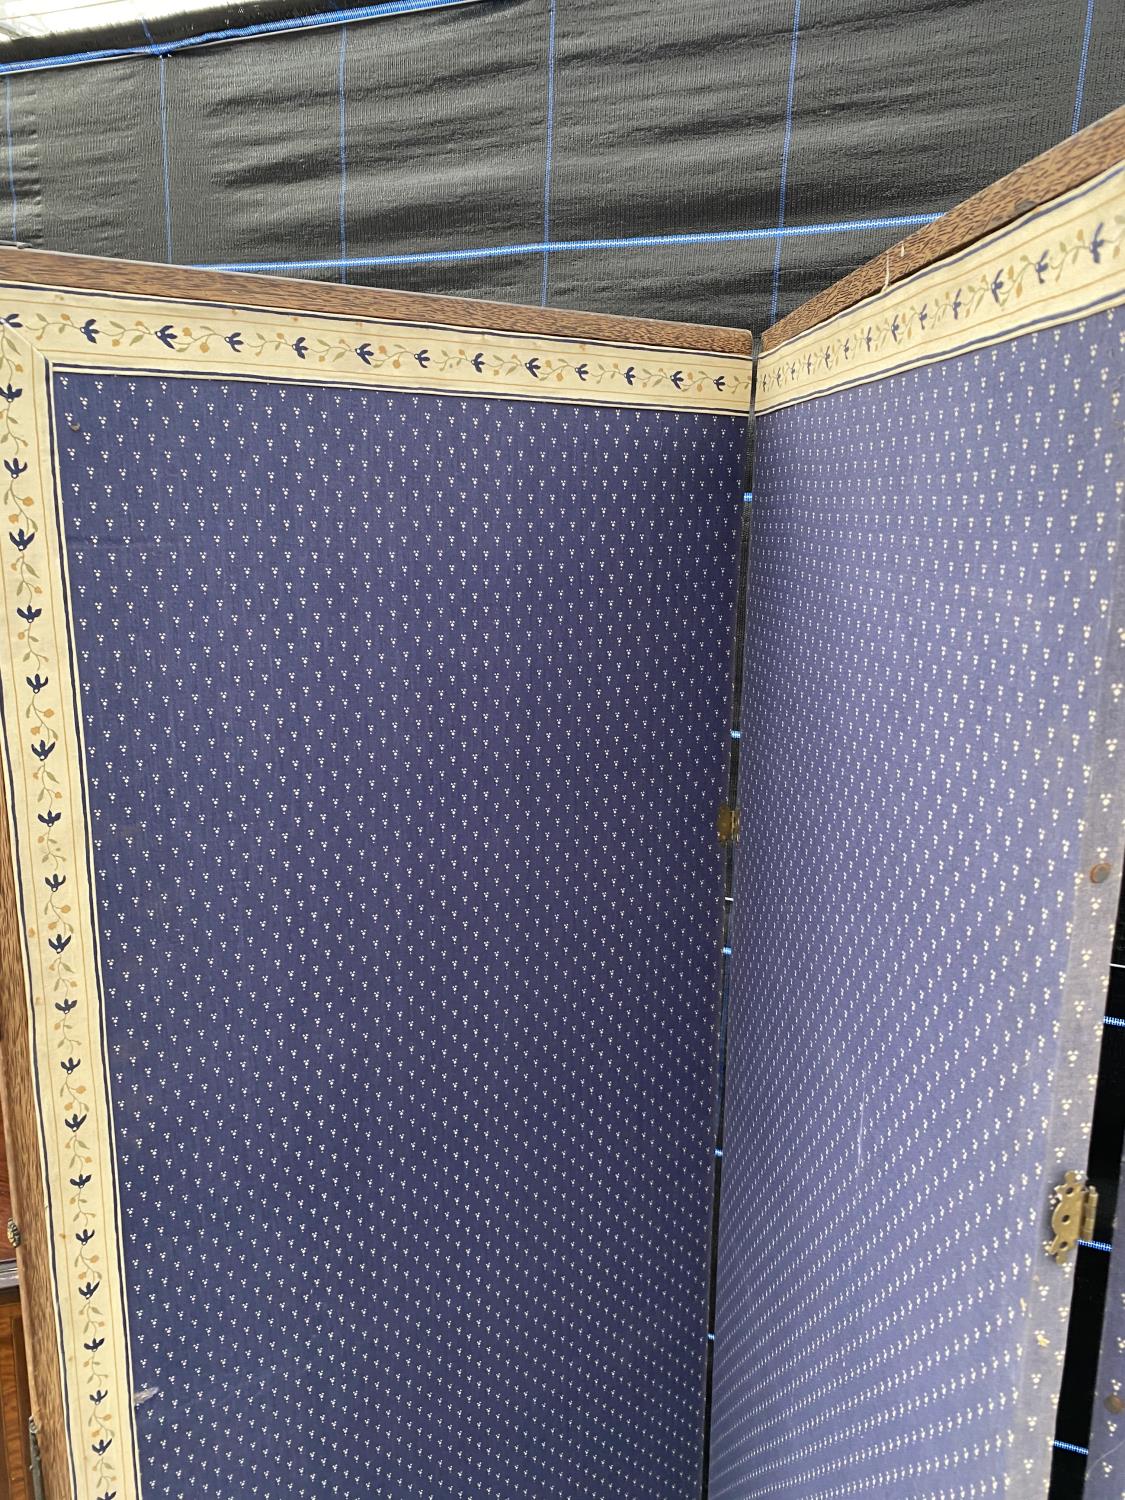 A FOUR SECTION FOLDING SCREEN - Image 3 of 4